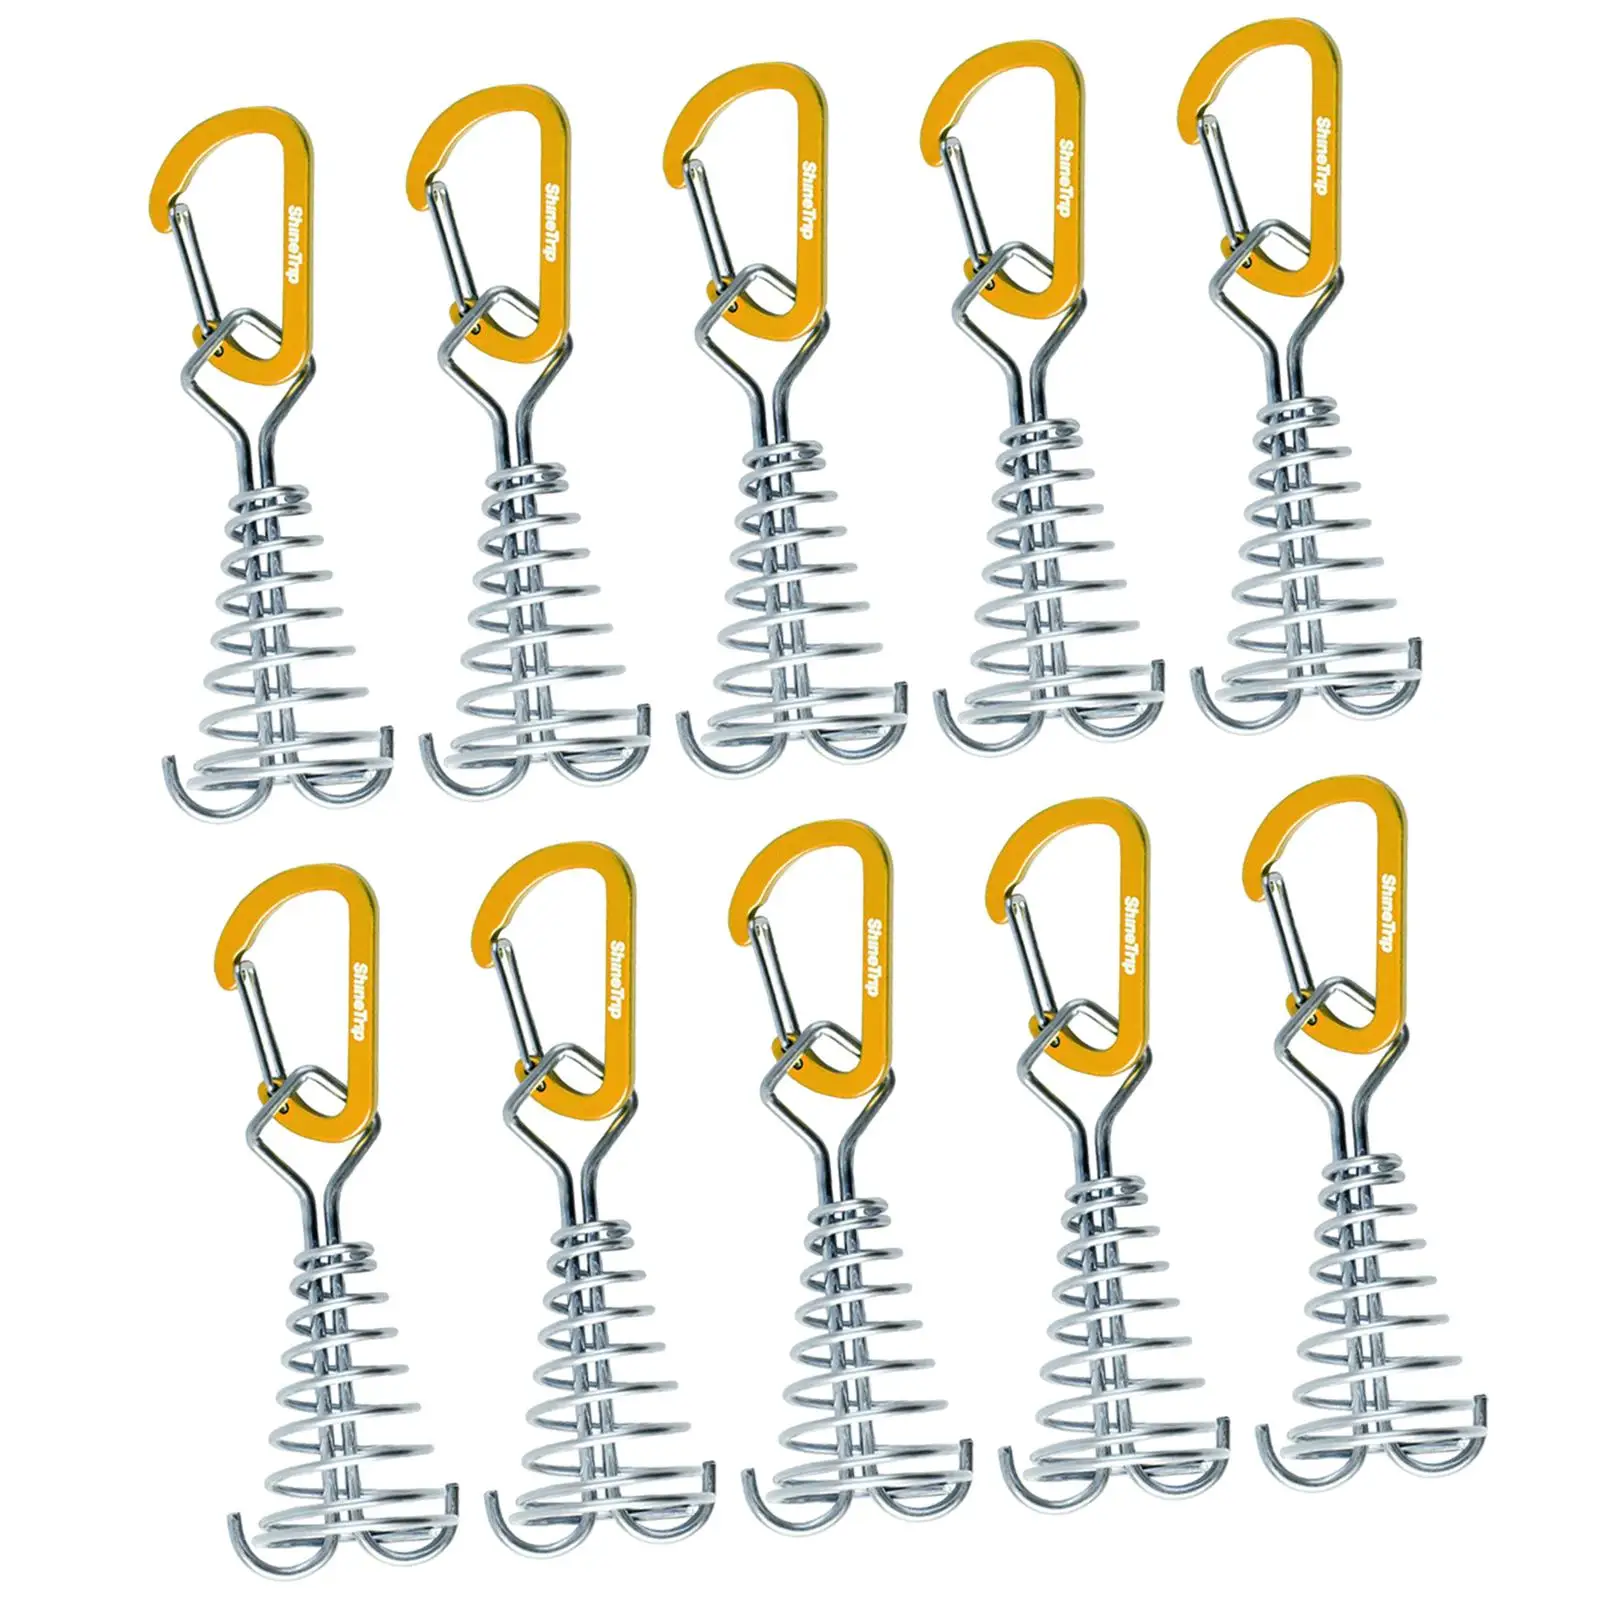 10x Deck Anchor Pegs with Carabiners, Windproof Tent Rope Tightener, Deck Tie Down Tent Stakes for Wood Platform Accessories